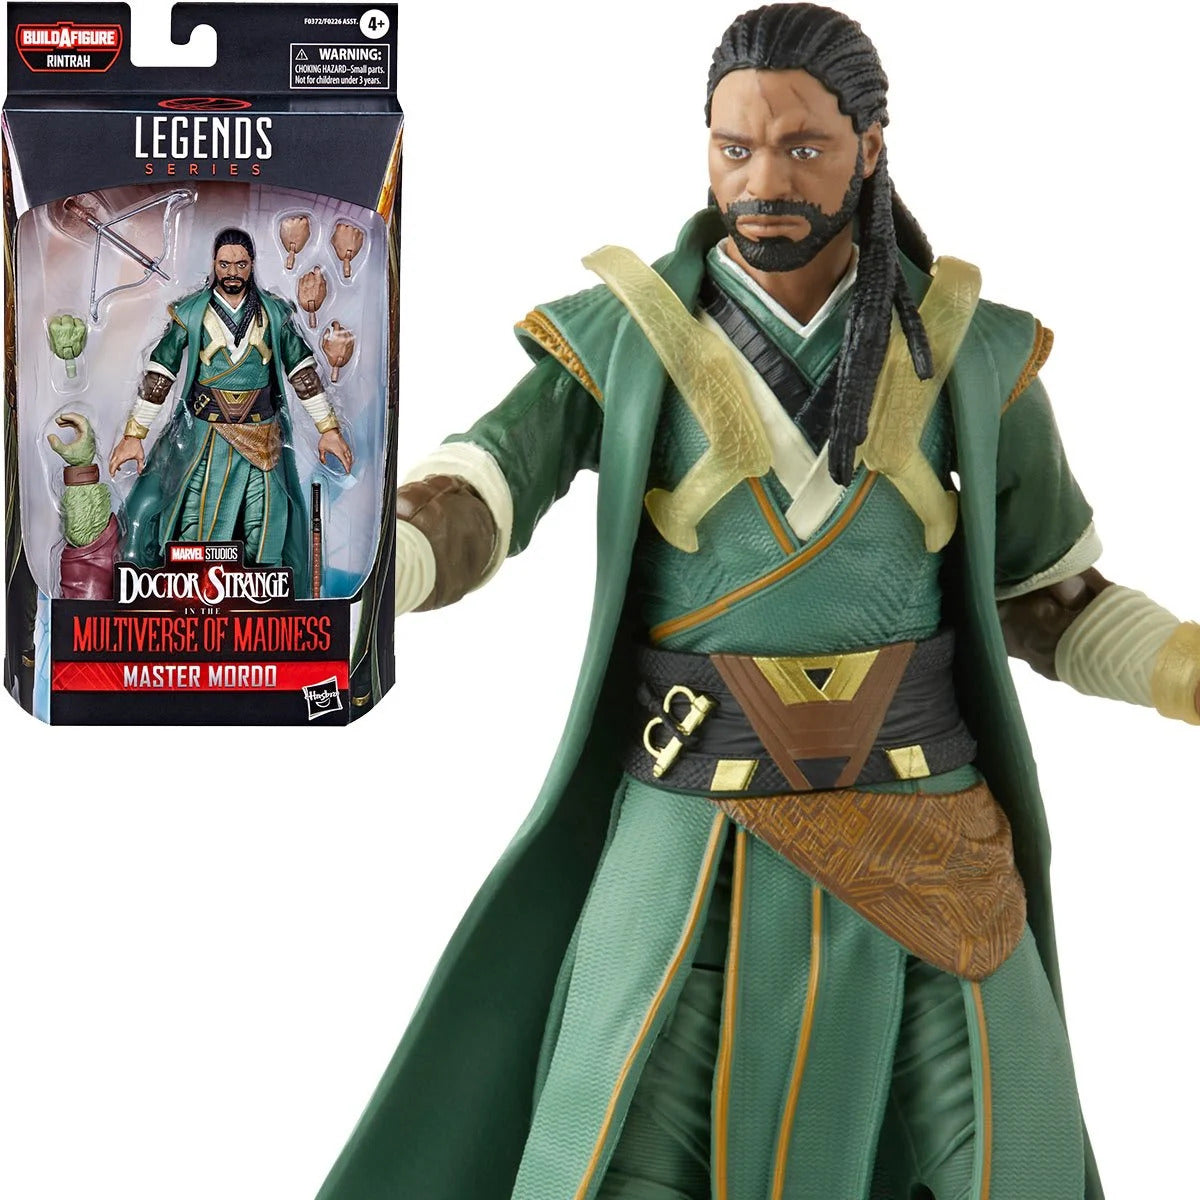 Doctor Strange in the Multiverse of Madness Marvel Legends Master Mordo (Rintrah BAF) CrazyCollecting Mint Condition